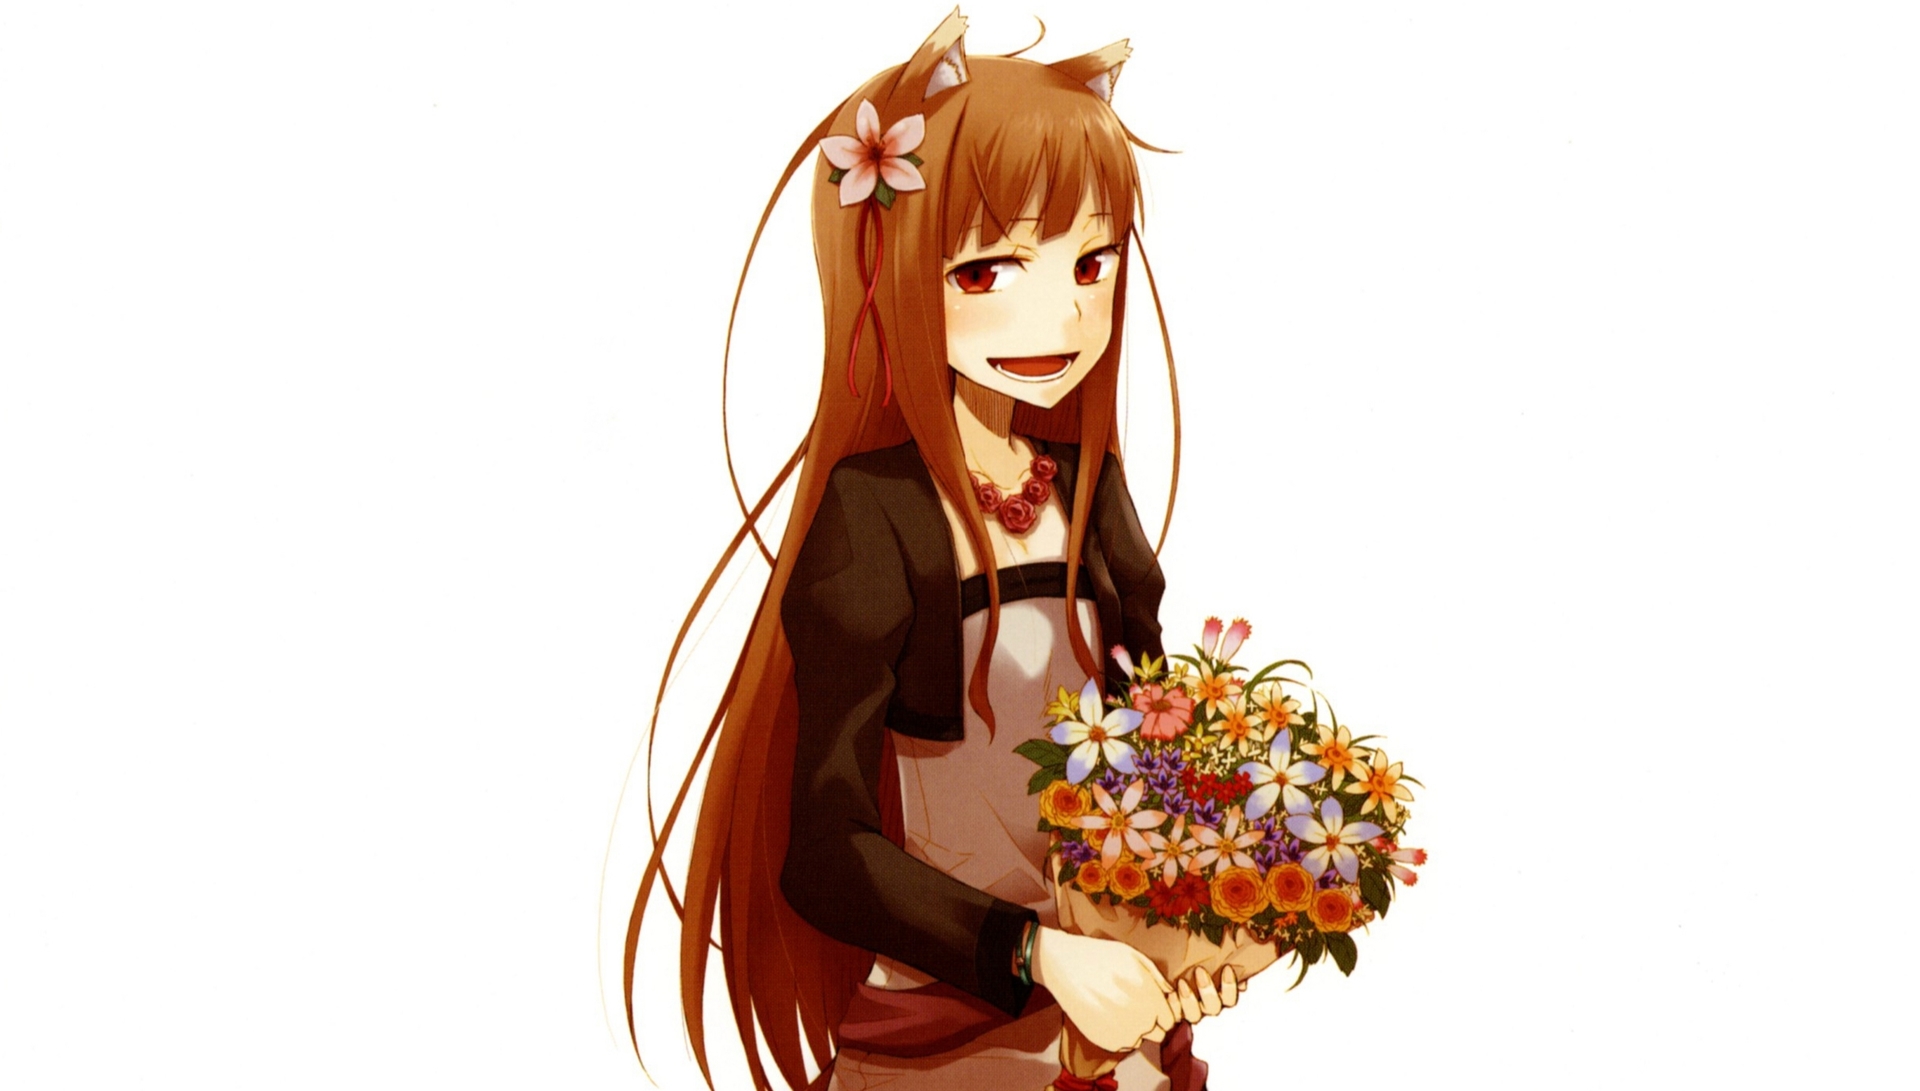 Holo Spice Amp Wolf 1920x1091